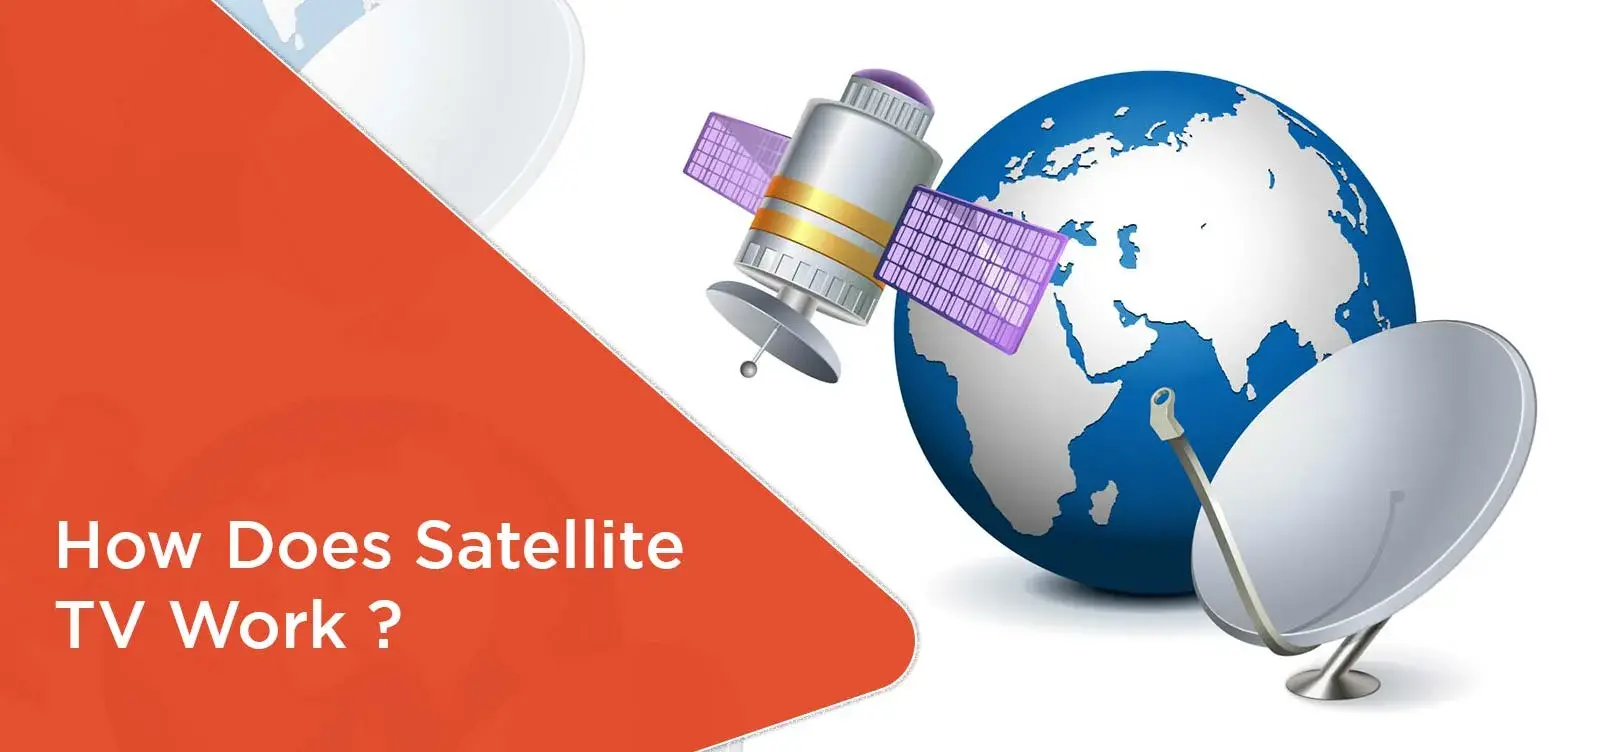 How Does Satellite TV Work